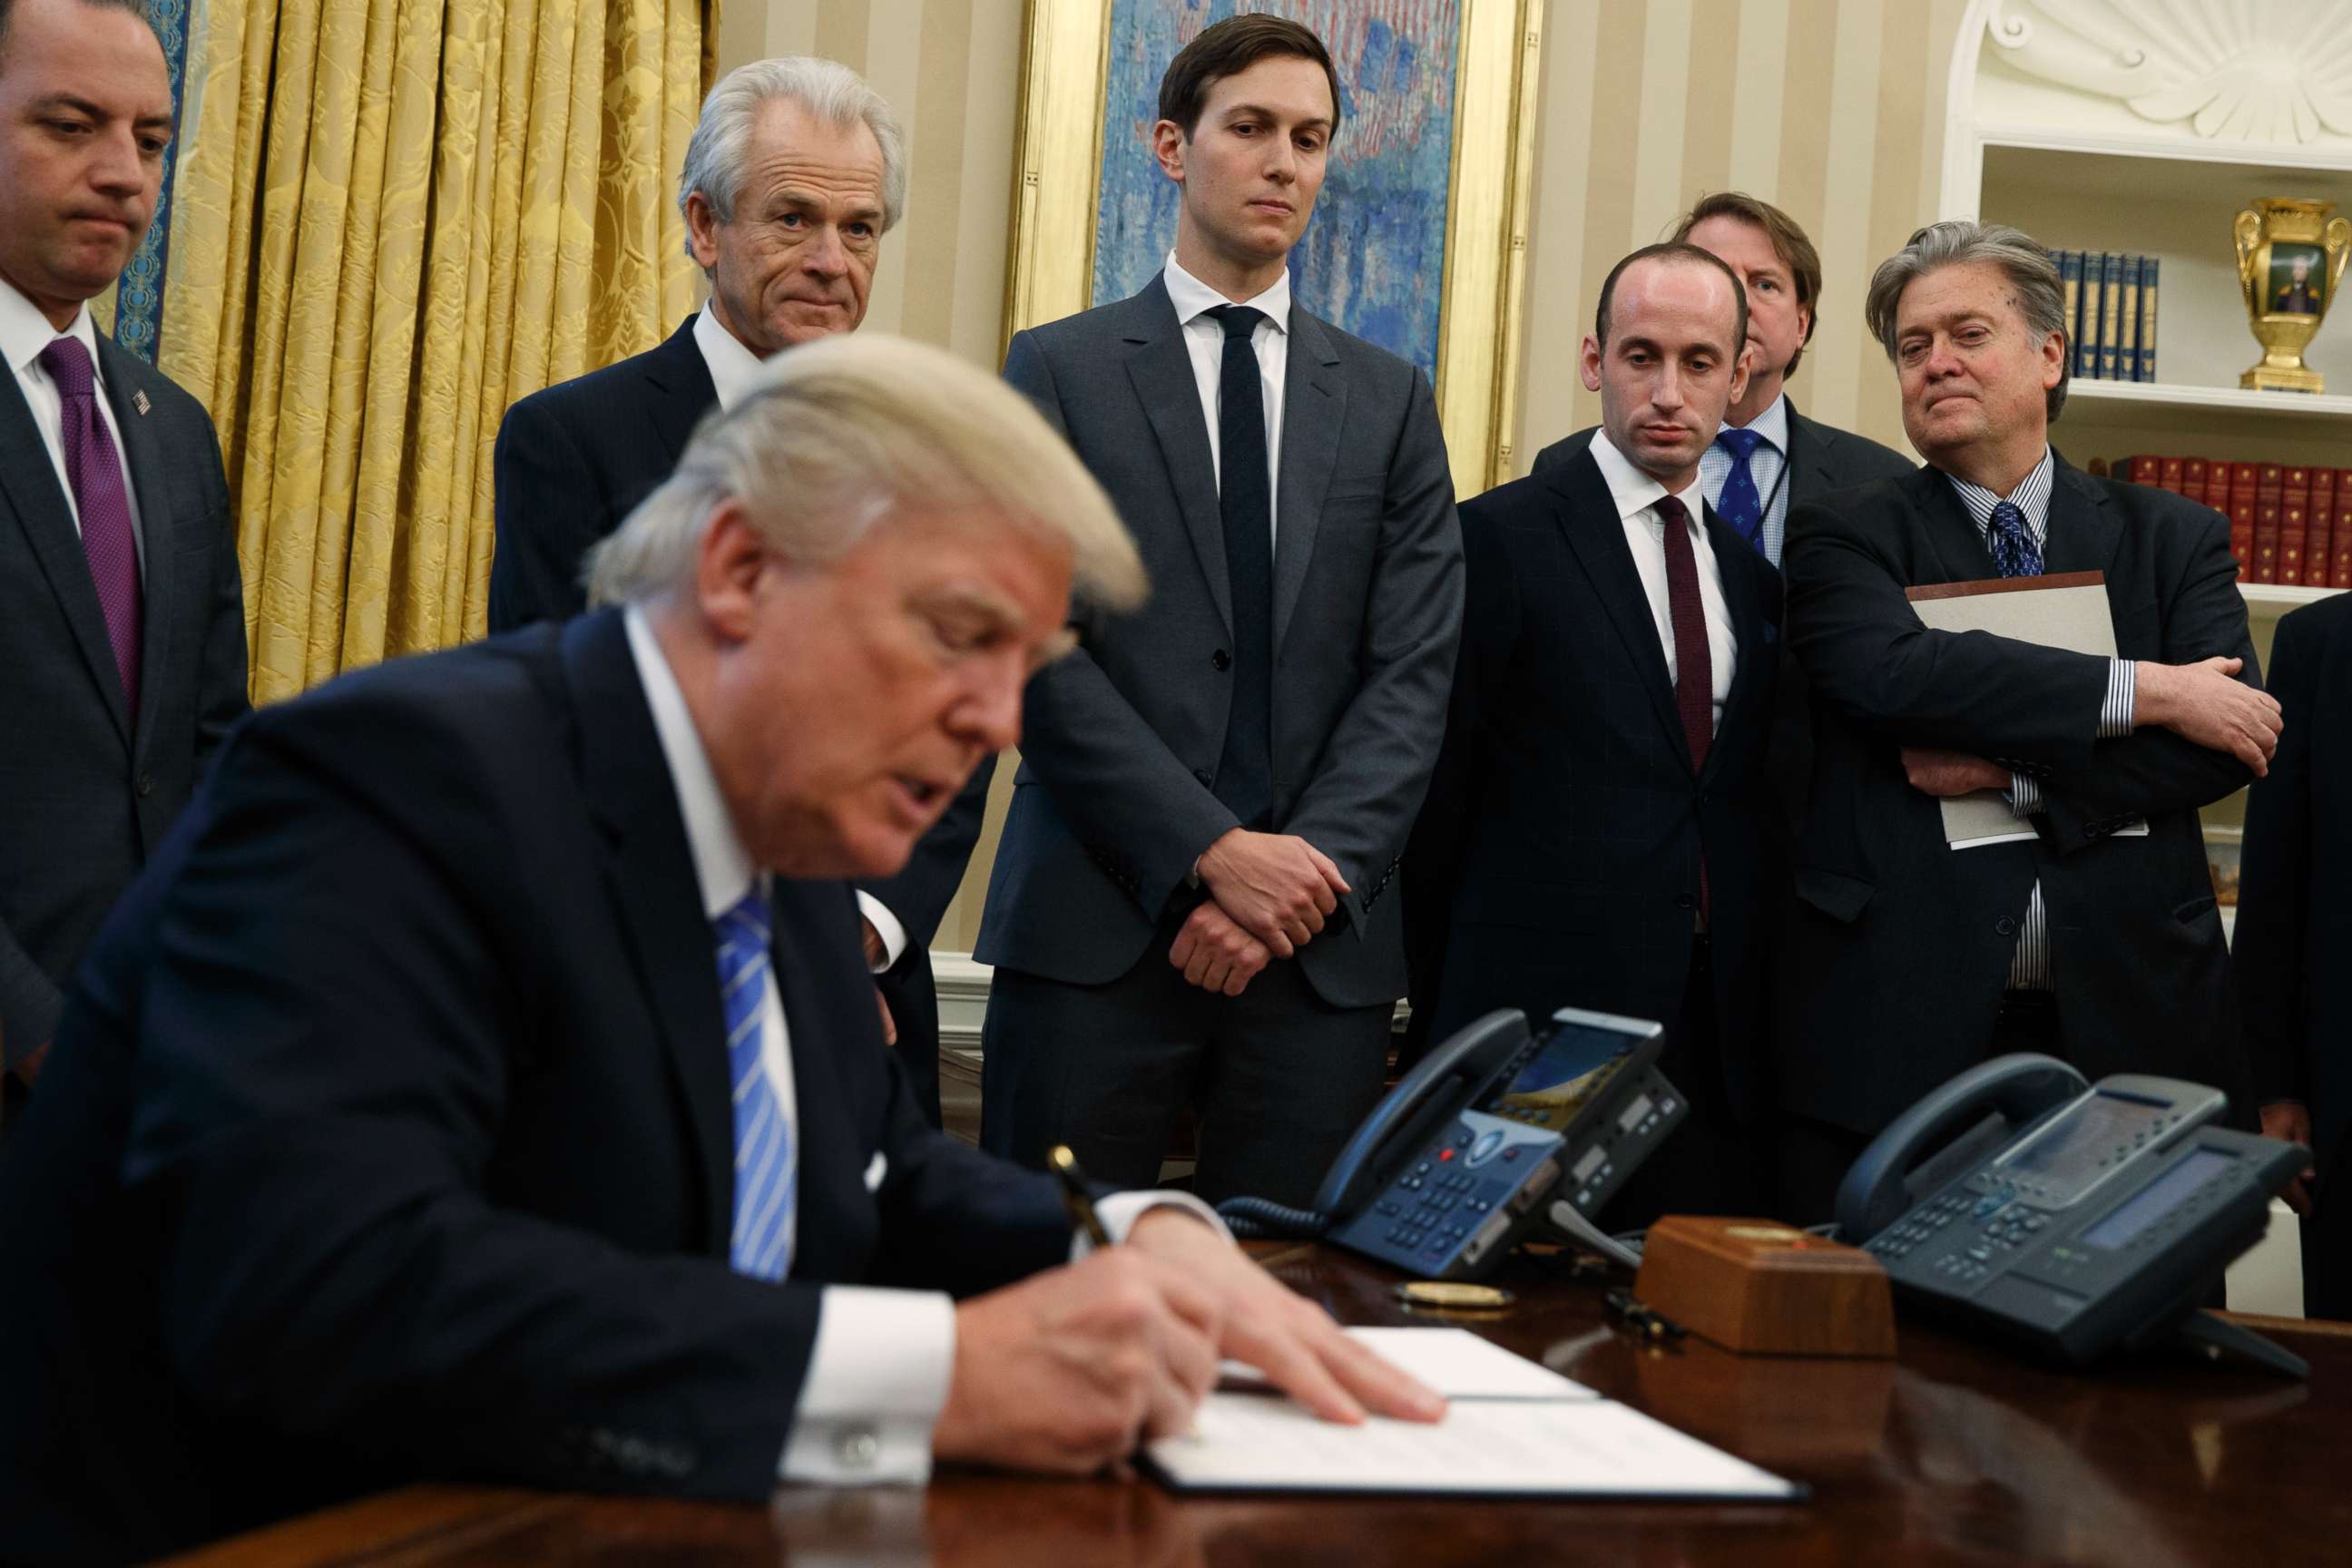 PHOTO: From left, Reince Priebus, National Trade Council adviser Peter Navarro, Jared Kushner, policy adviser Stephen Miller, and chief strategist Steve Bannon watch as President Donald Trump signs an executive order on Jan. 23, 2017, in Washington.